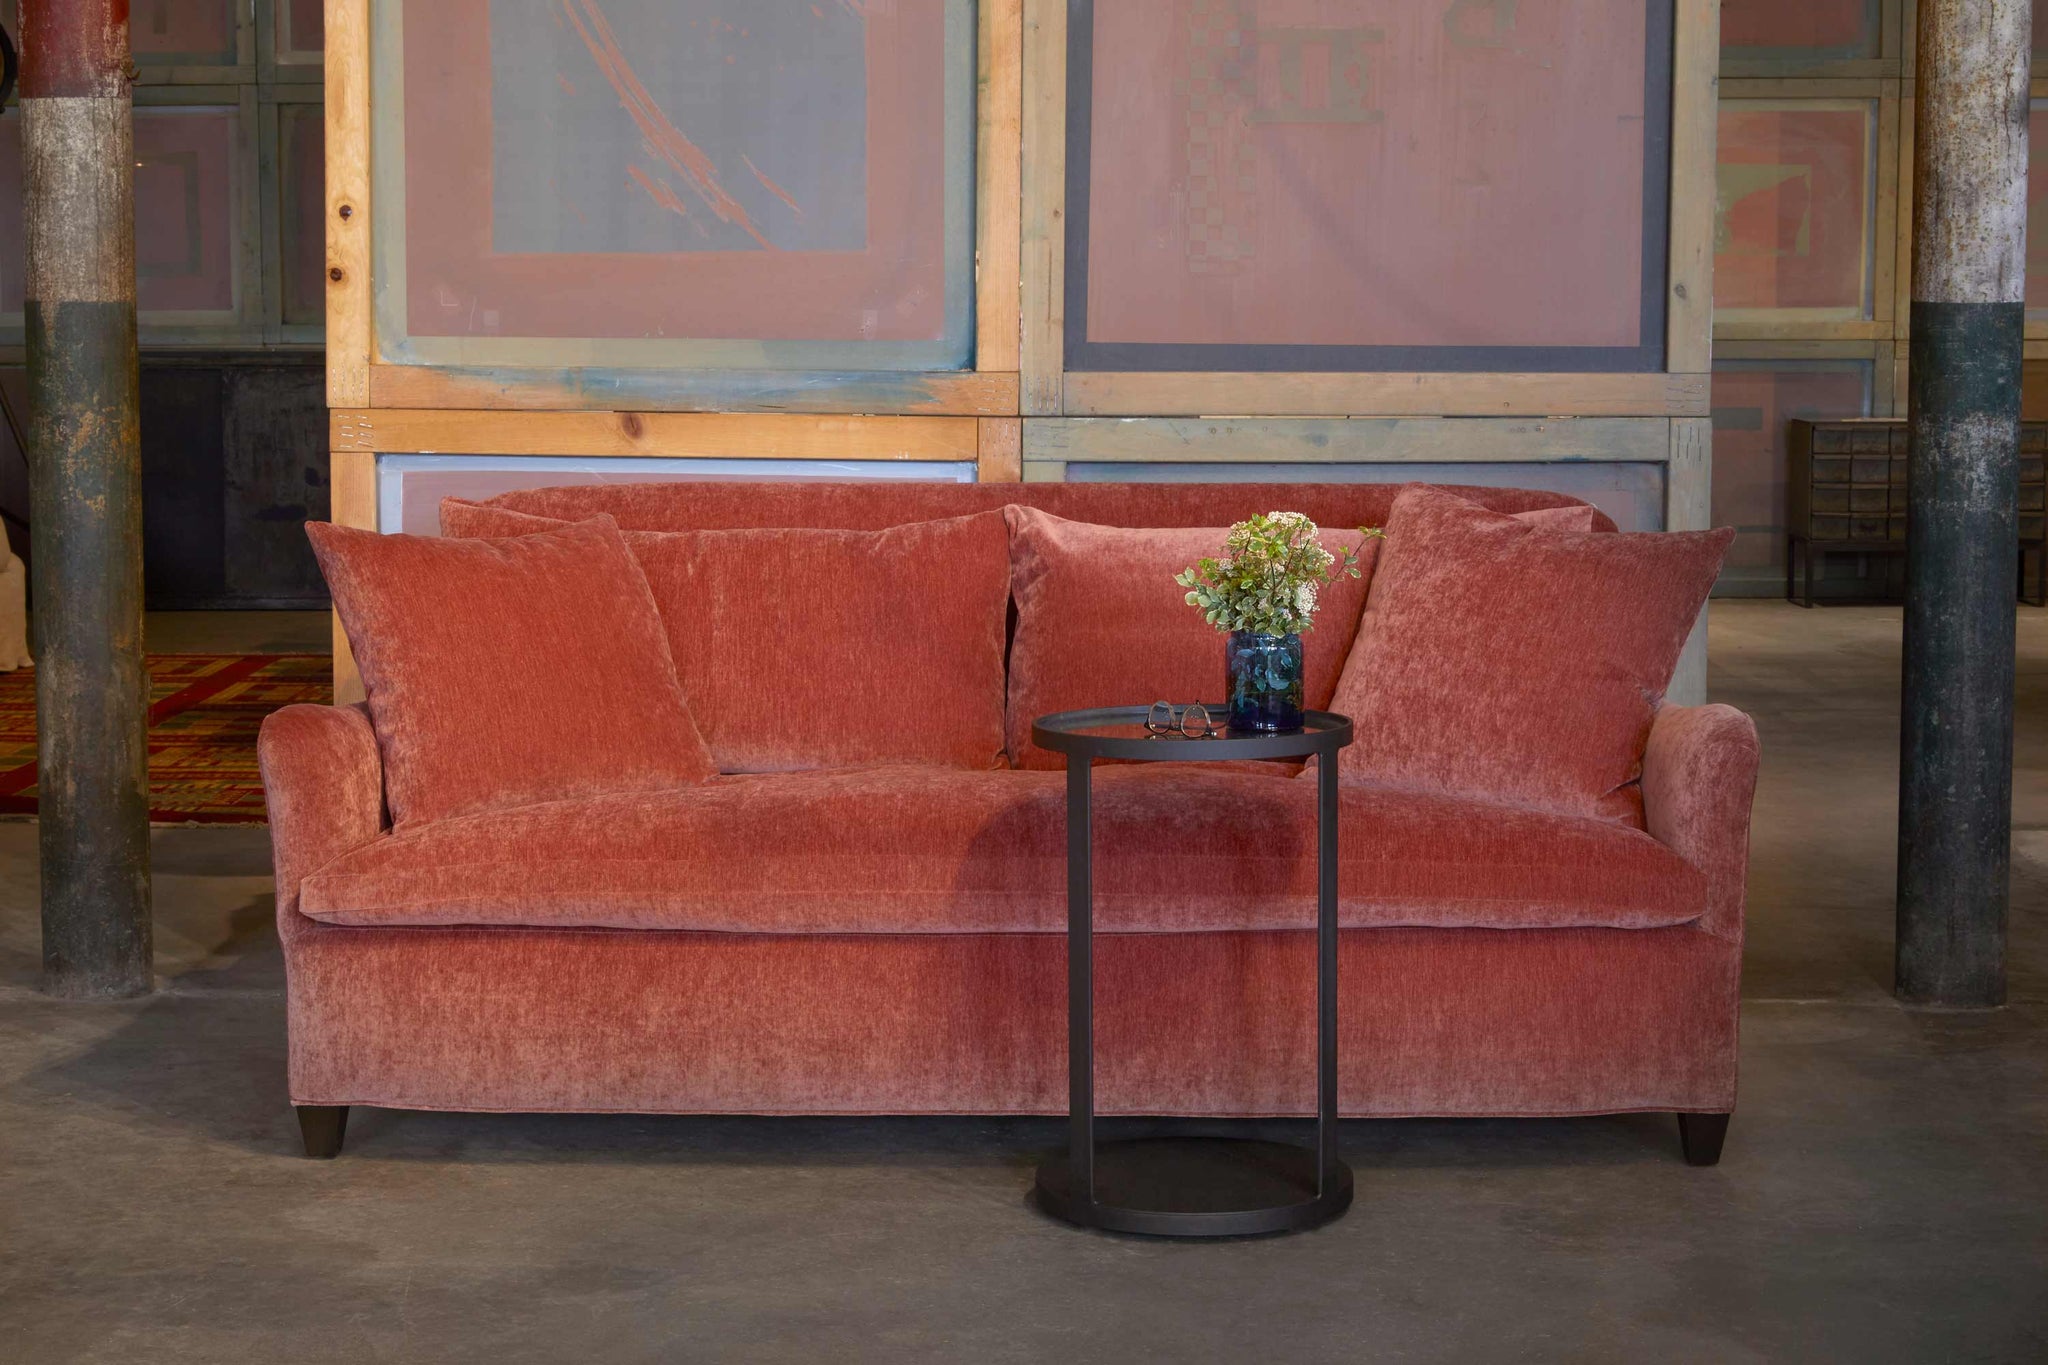  The Hazel loveseat is upholstered in Lacey French Rose with a cantilever side table in front. There is a vase with flowers and glasses on the table. The background is a wall with vintage pink sunscreens.  Photographed in Lacey French Rose. 